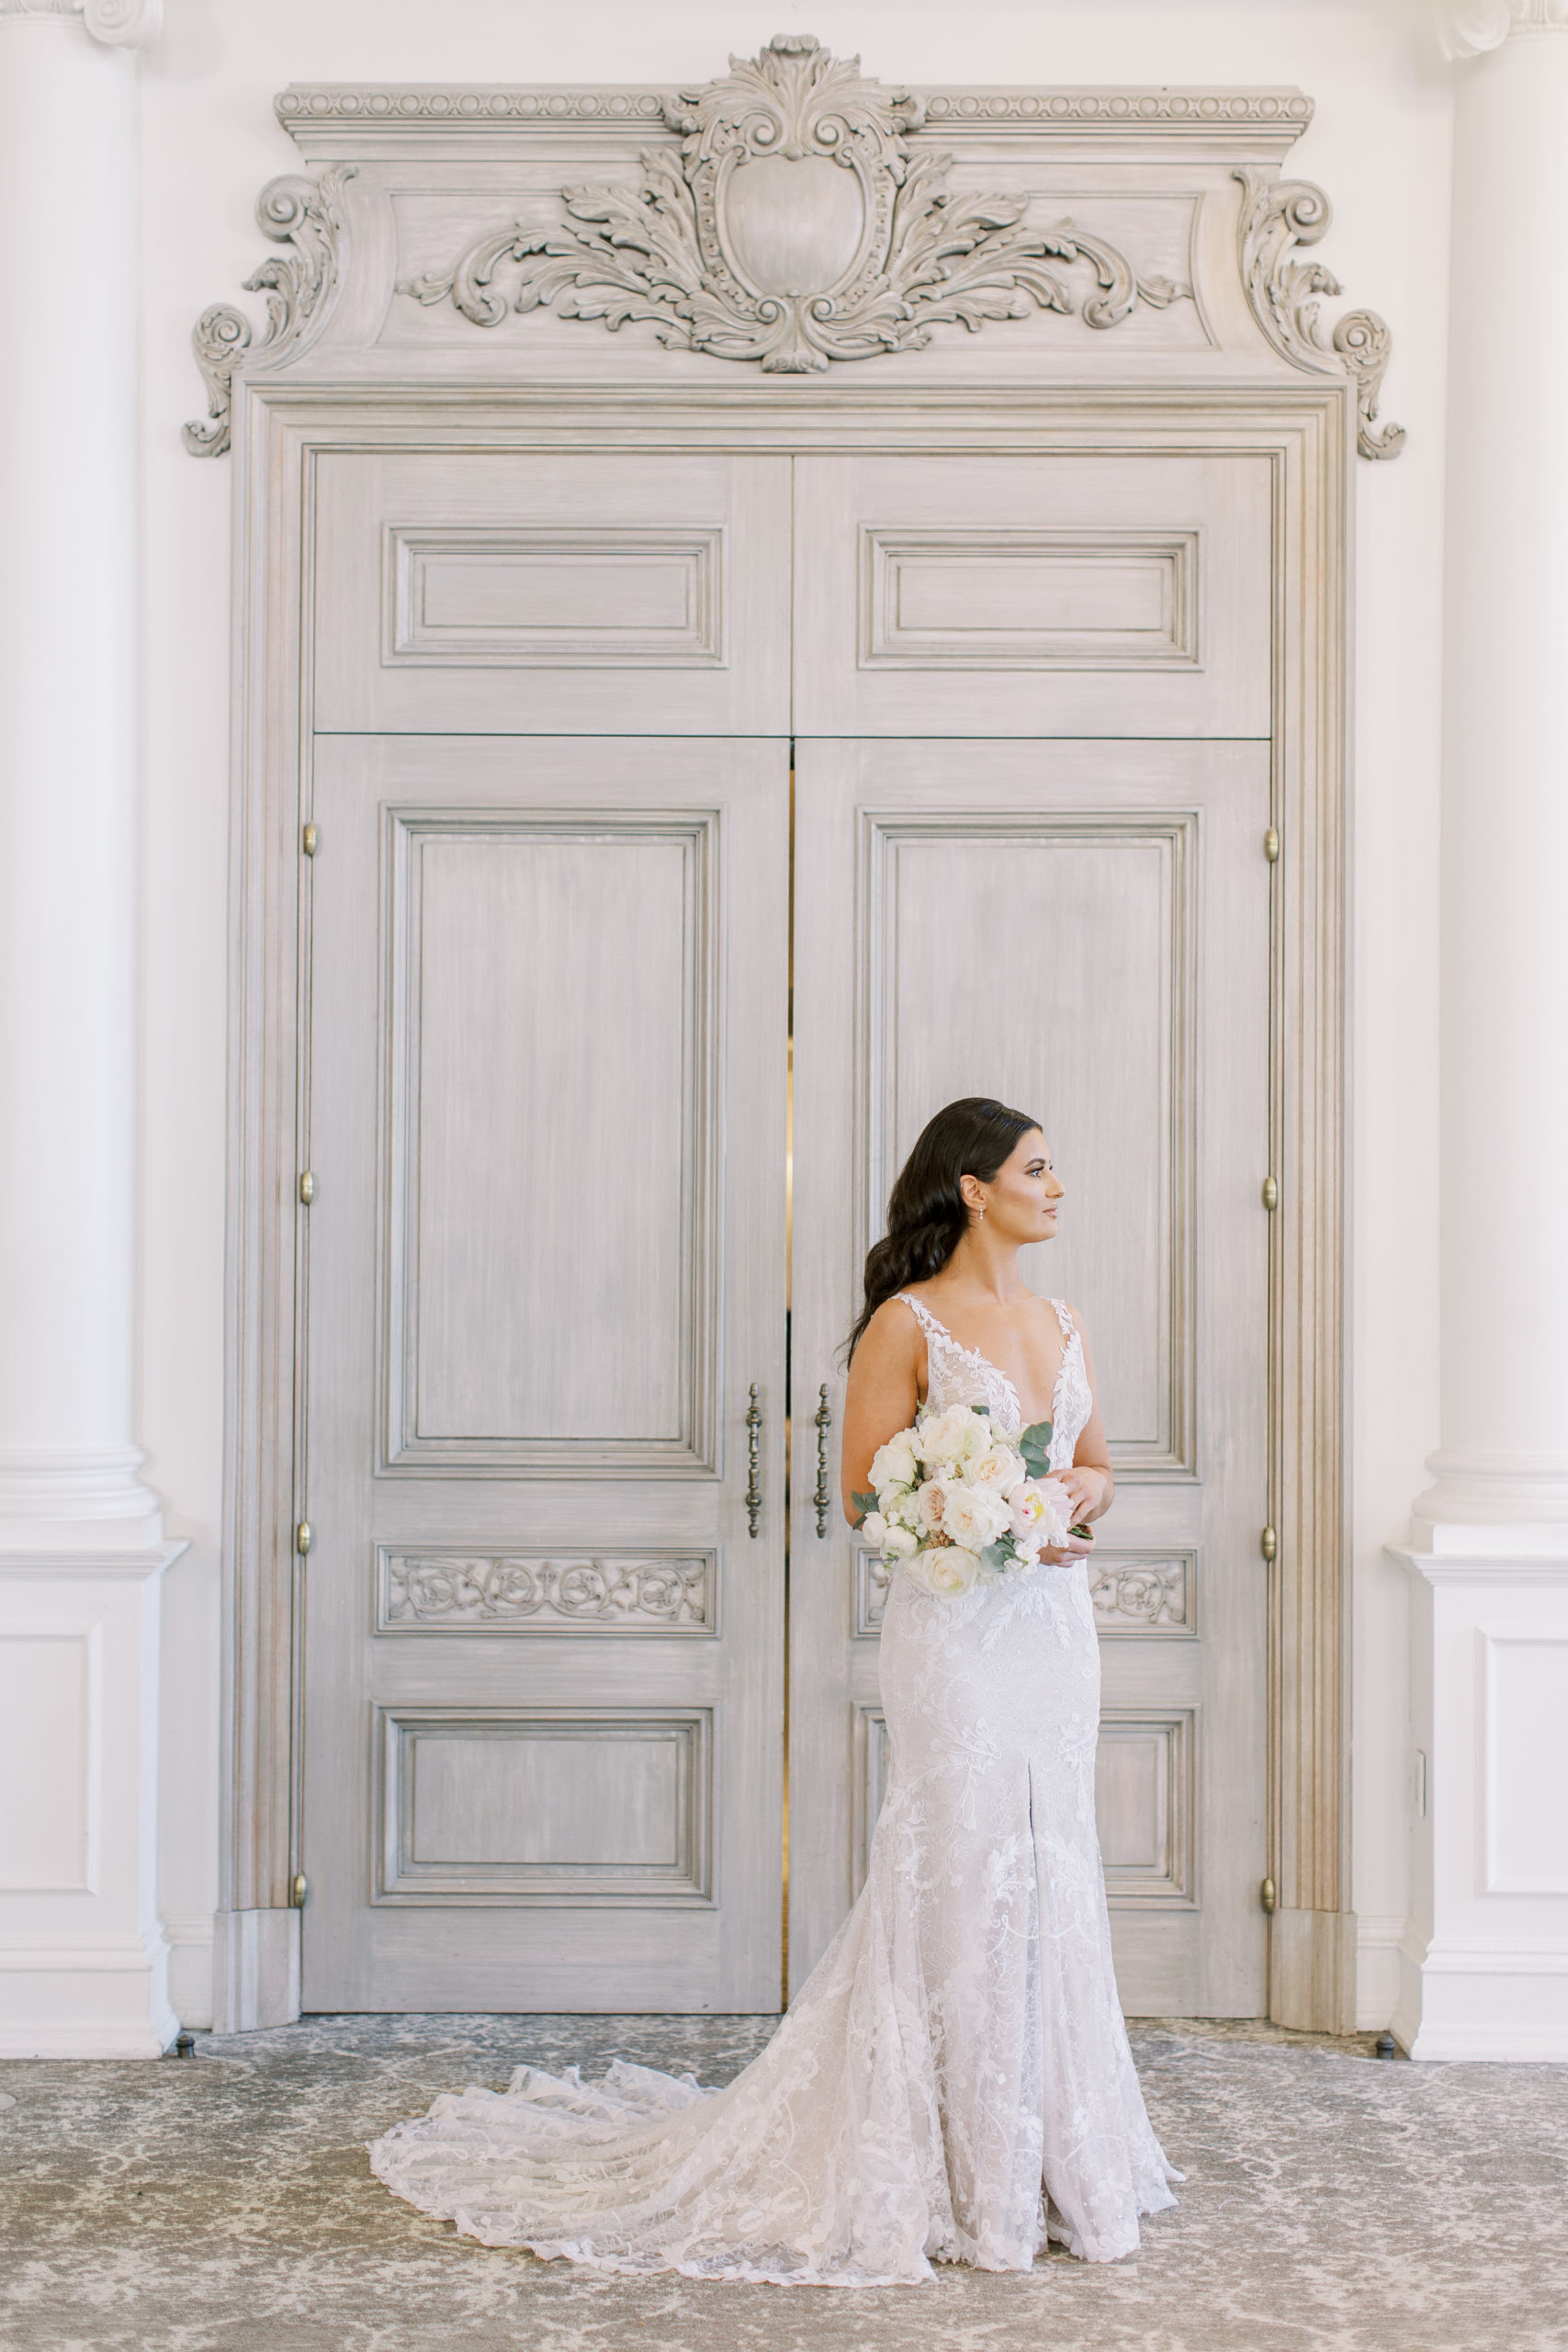 Bride posing holding rose wedding bouquet in front of grand door entrance for a Romantic Park Chateau Wedding Photography